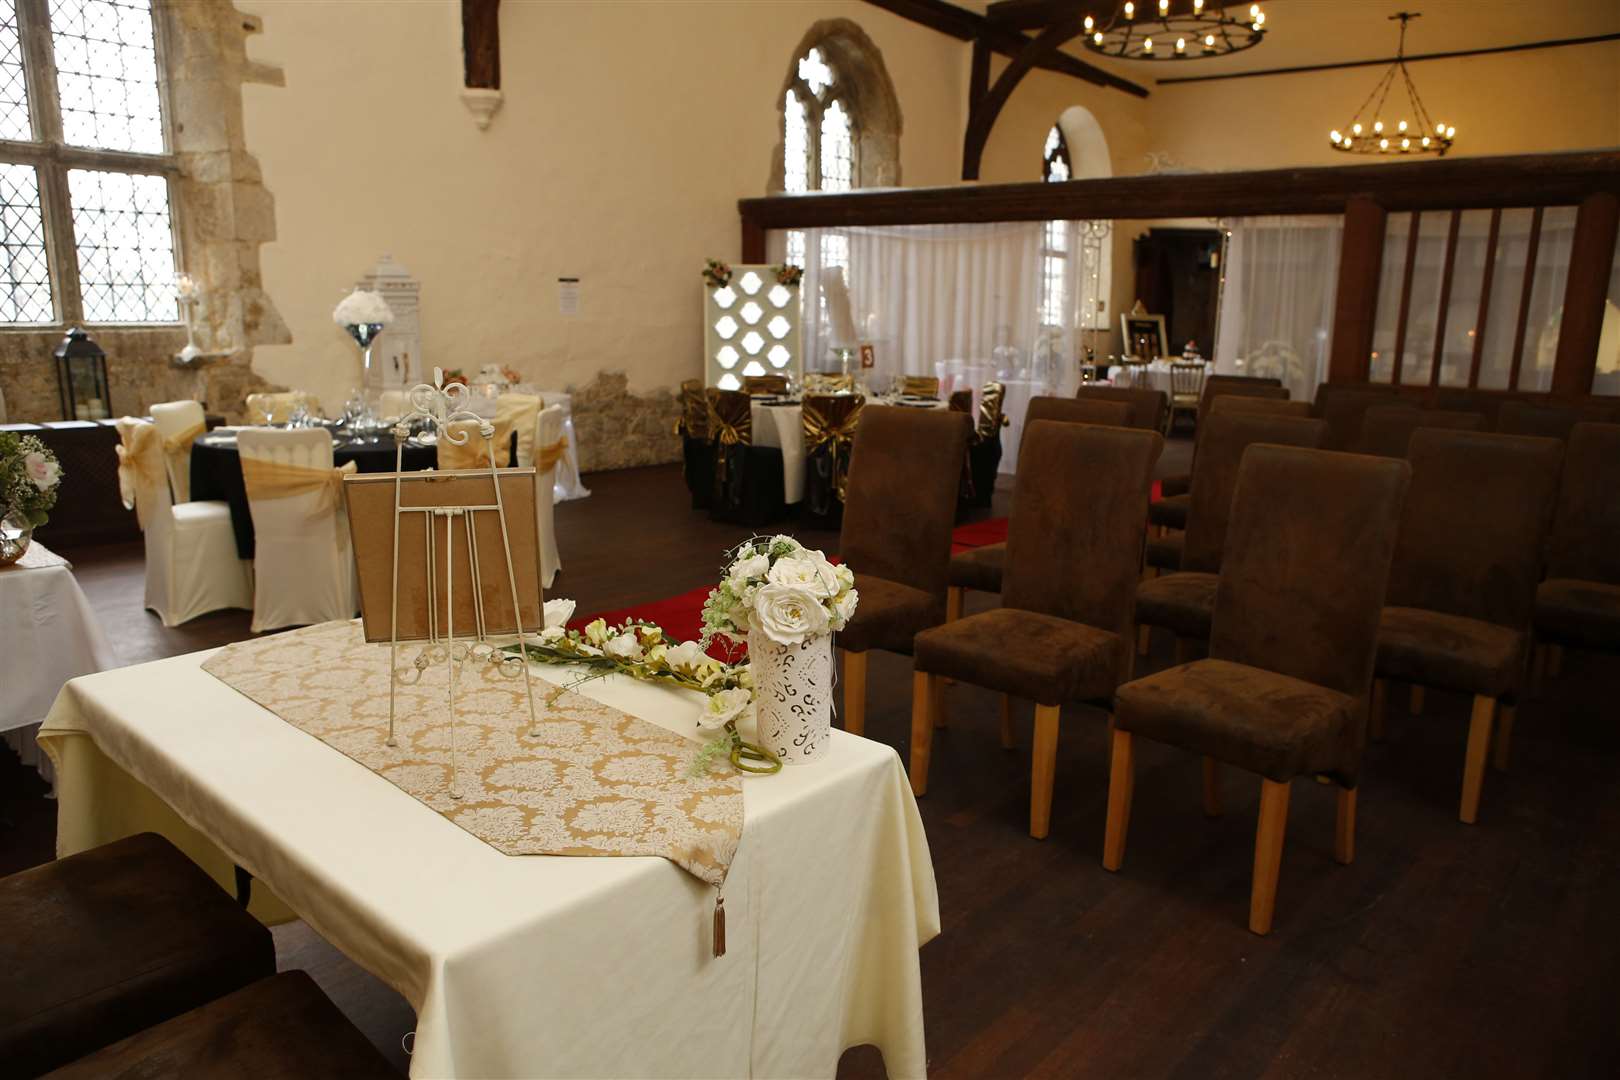 The banquet hall when the building, which is thought to date back to the 14th century, was a wedding venue